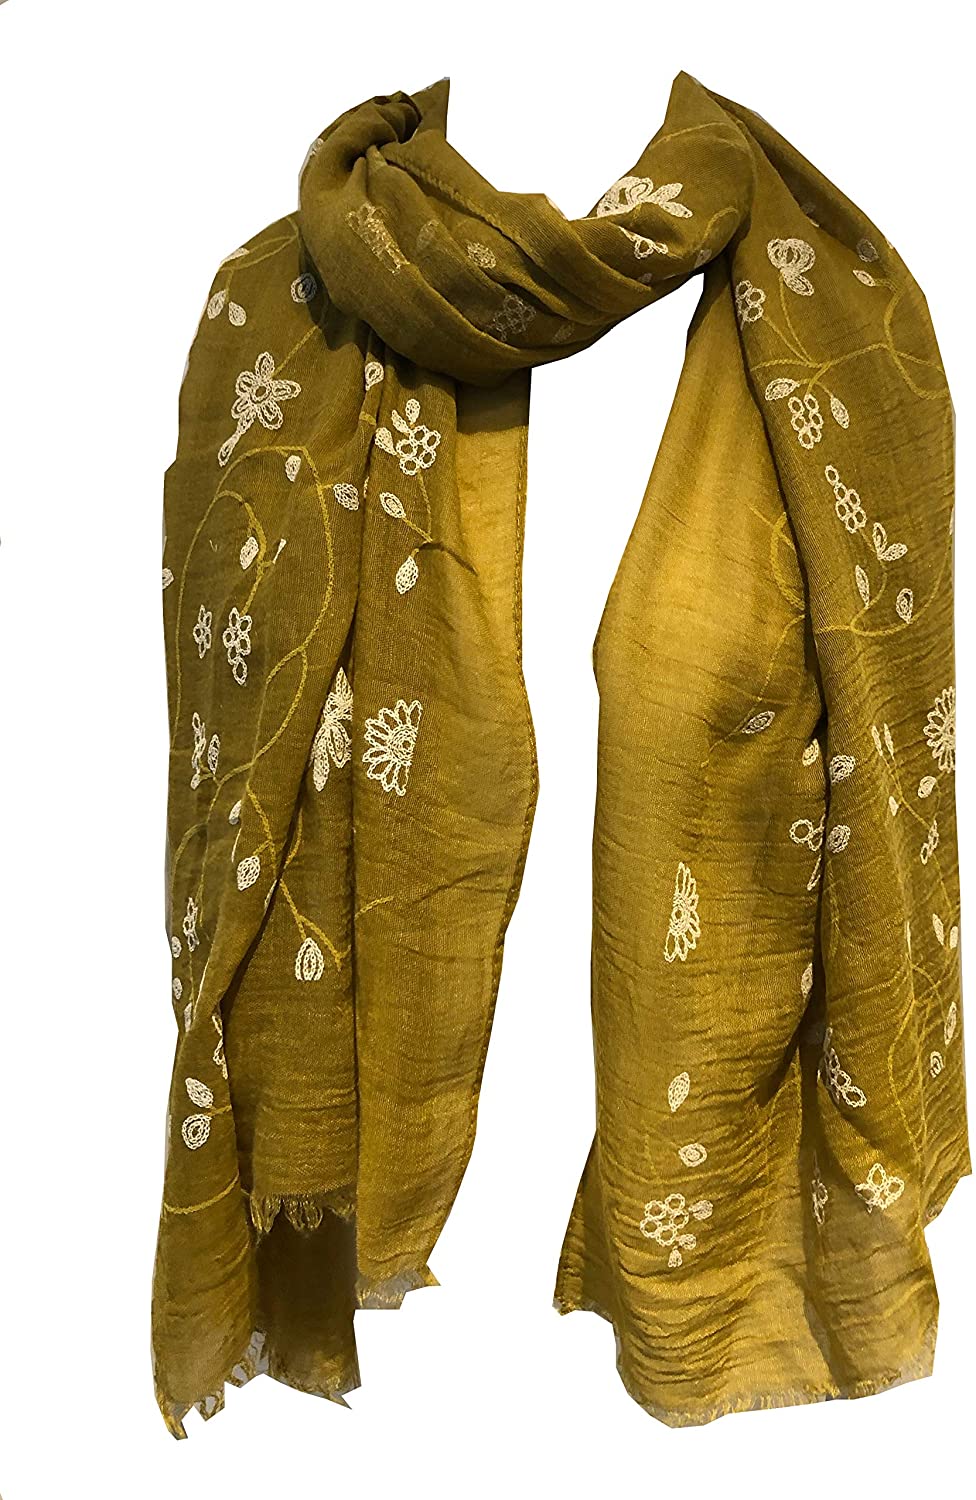 Pamper Yourself Now Mustard with White Embroidered Flowers and Leaf Design Long Scarf/wrap with Frayed Edge